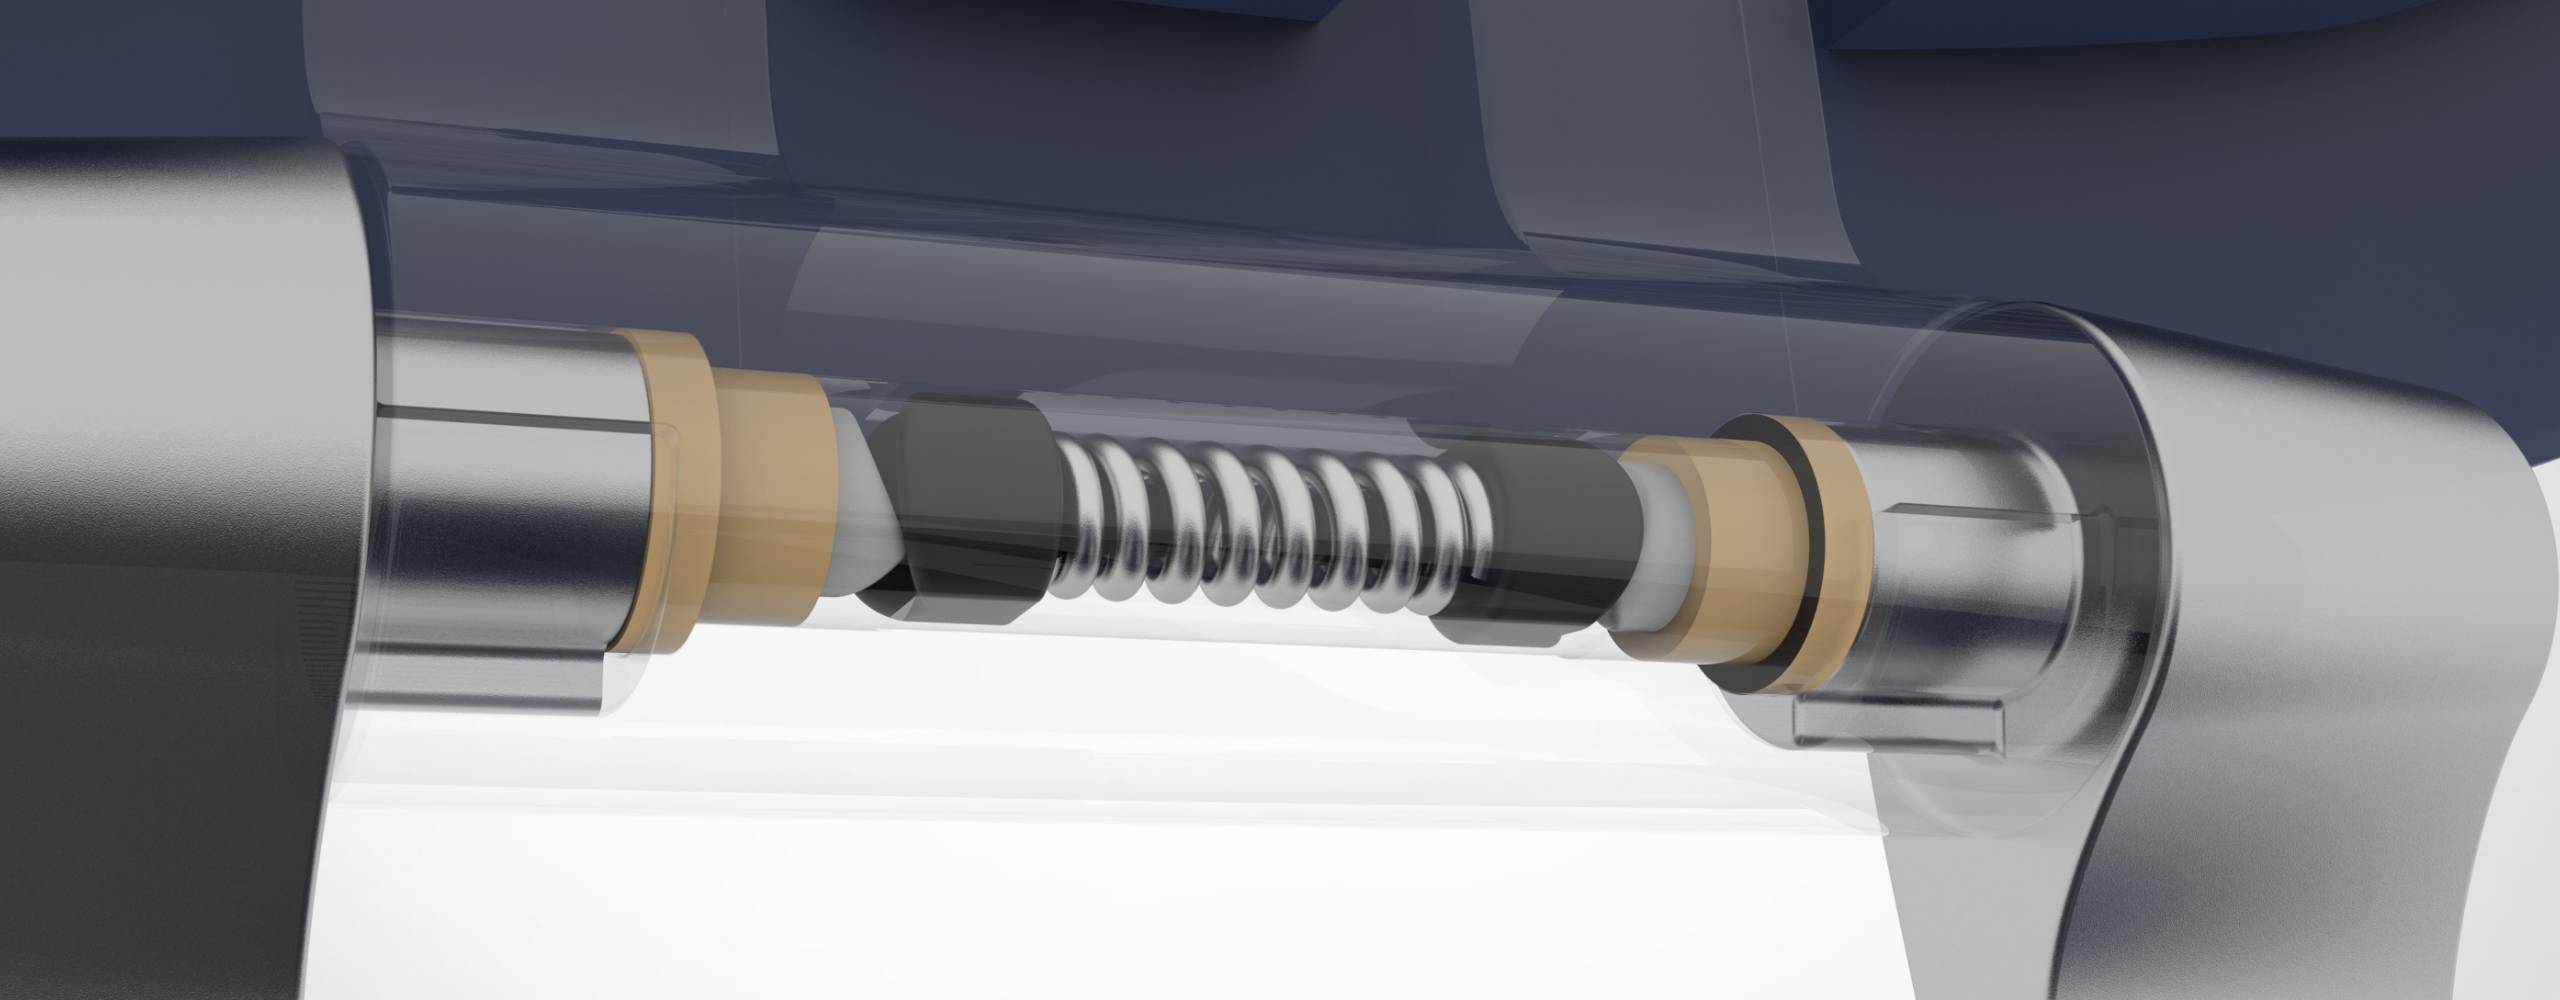 This is a close up rendering of the hinge of the Pebbl mediation chair's hinge. There are multiple pieces all connected to a big metal spring in the middle of the hinge.